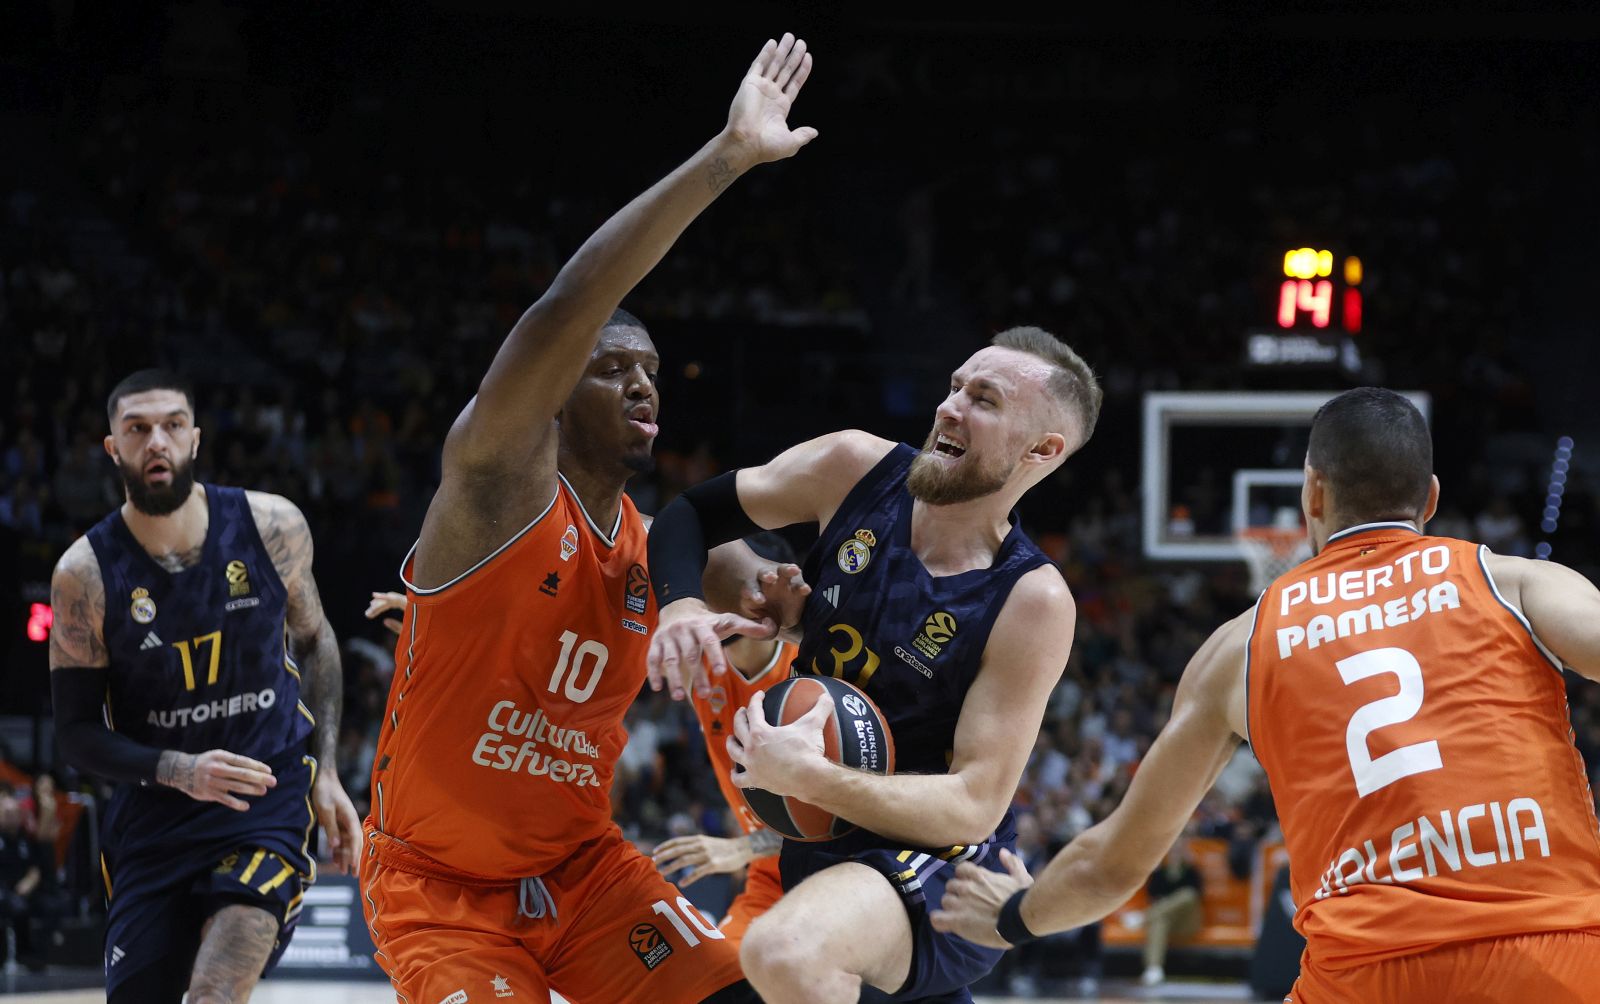 epa10975286 Real Madrid's Dzanan Musa (C) in action against Valencia's Damien Inglis (2-L) during the Euroleague basketball match between Valencia Basket and Real Madrid, in Valencia, Spain, 14 November 2023.  EPA/Miguel Angel Polo